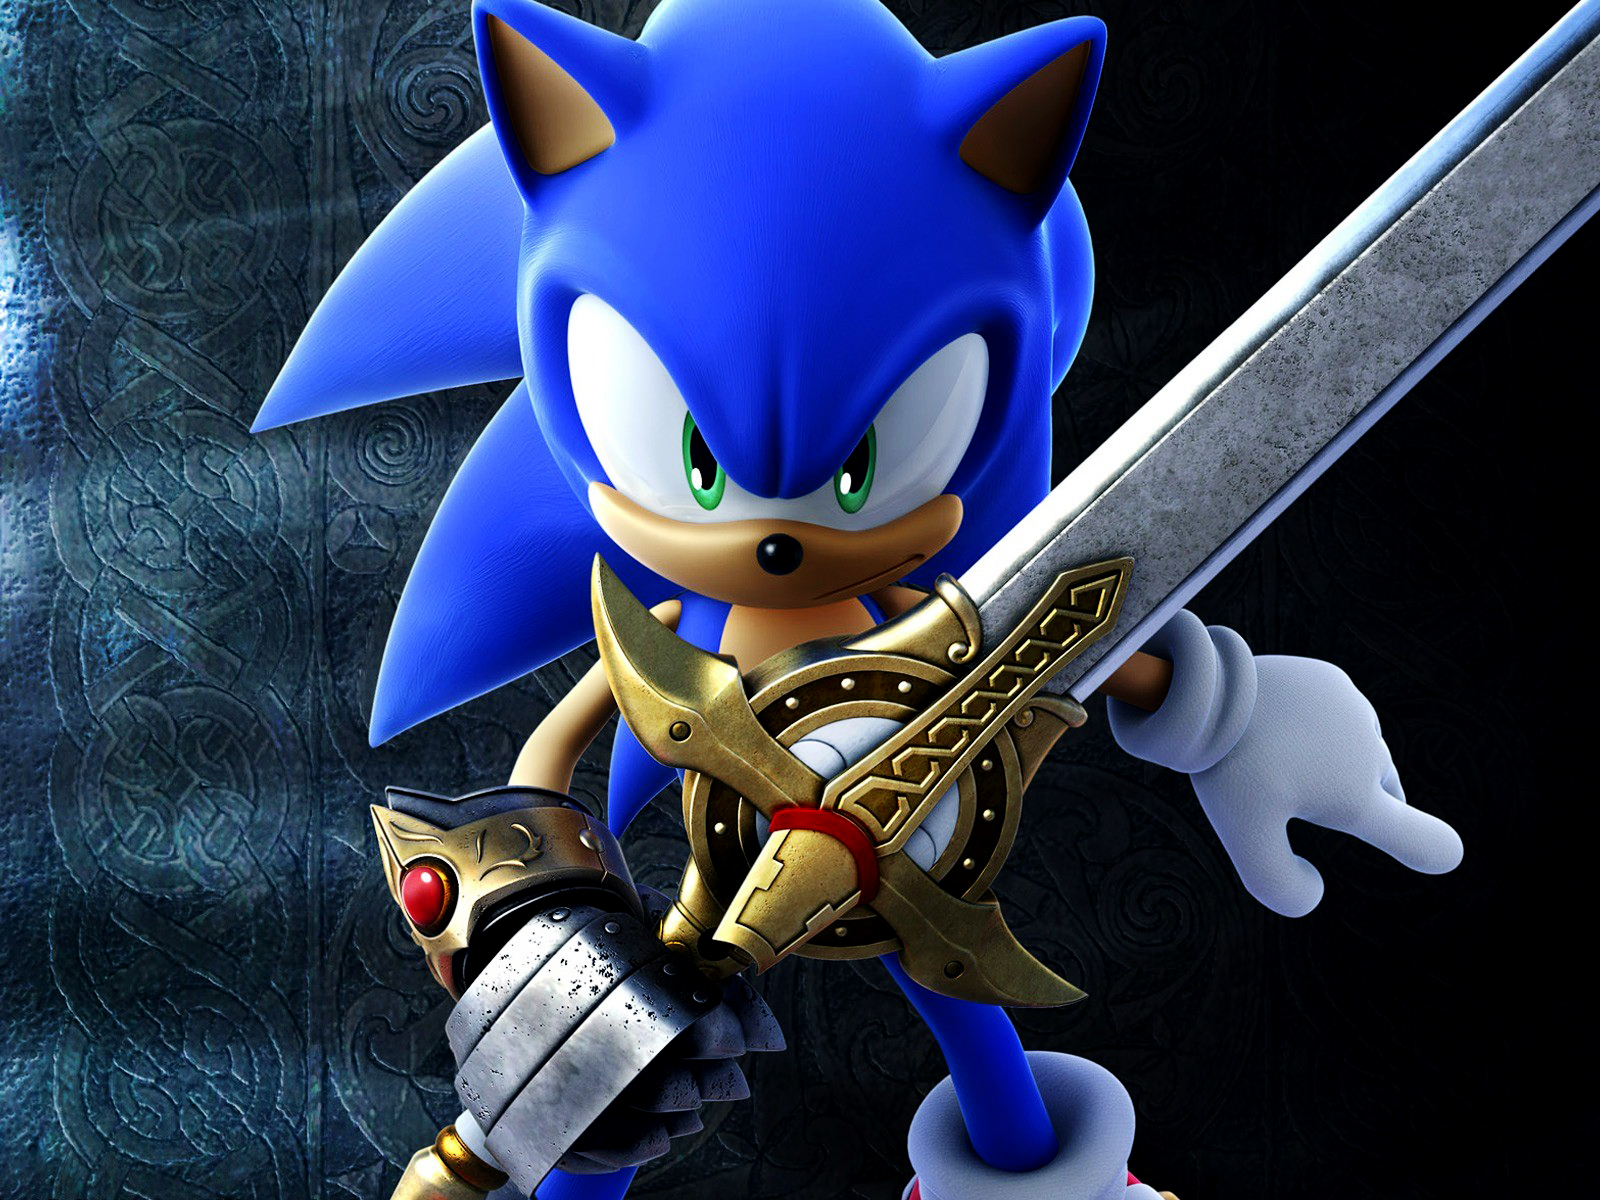 Sonic The Hedgehog Video Games HD Wallpapers| HD Wallpapers Games